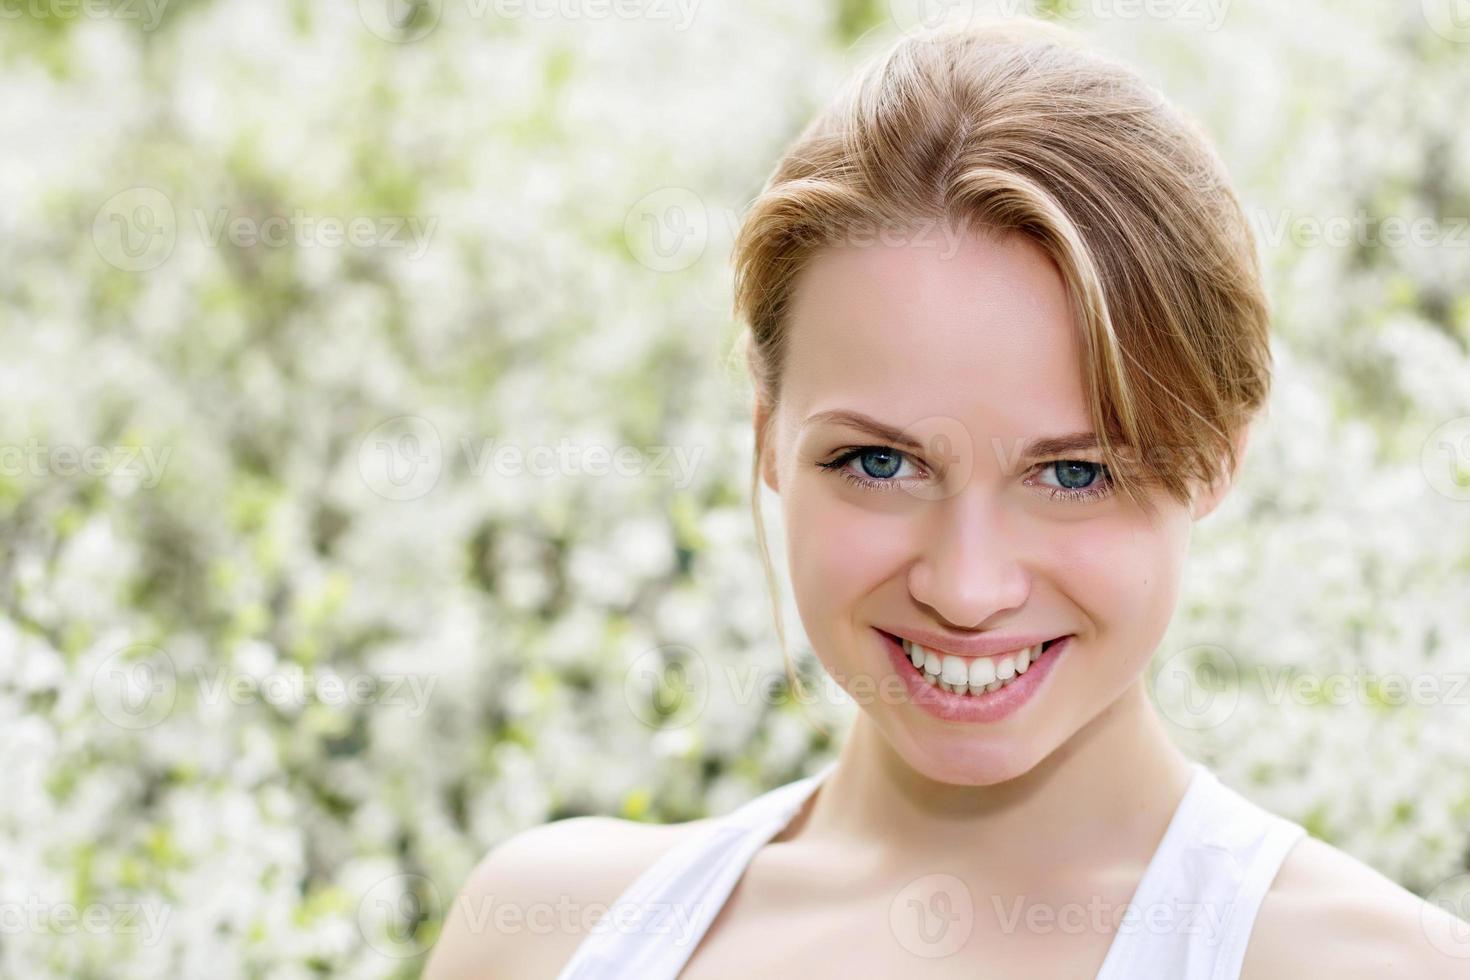 Smiling young blond woman photo